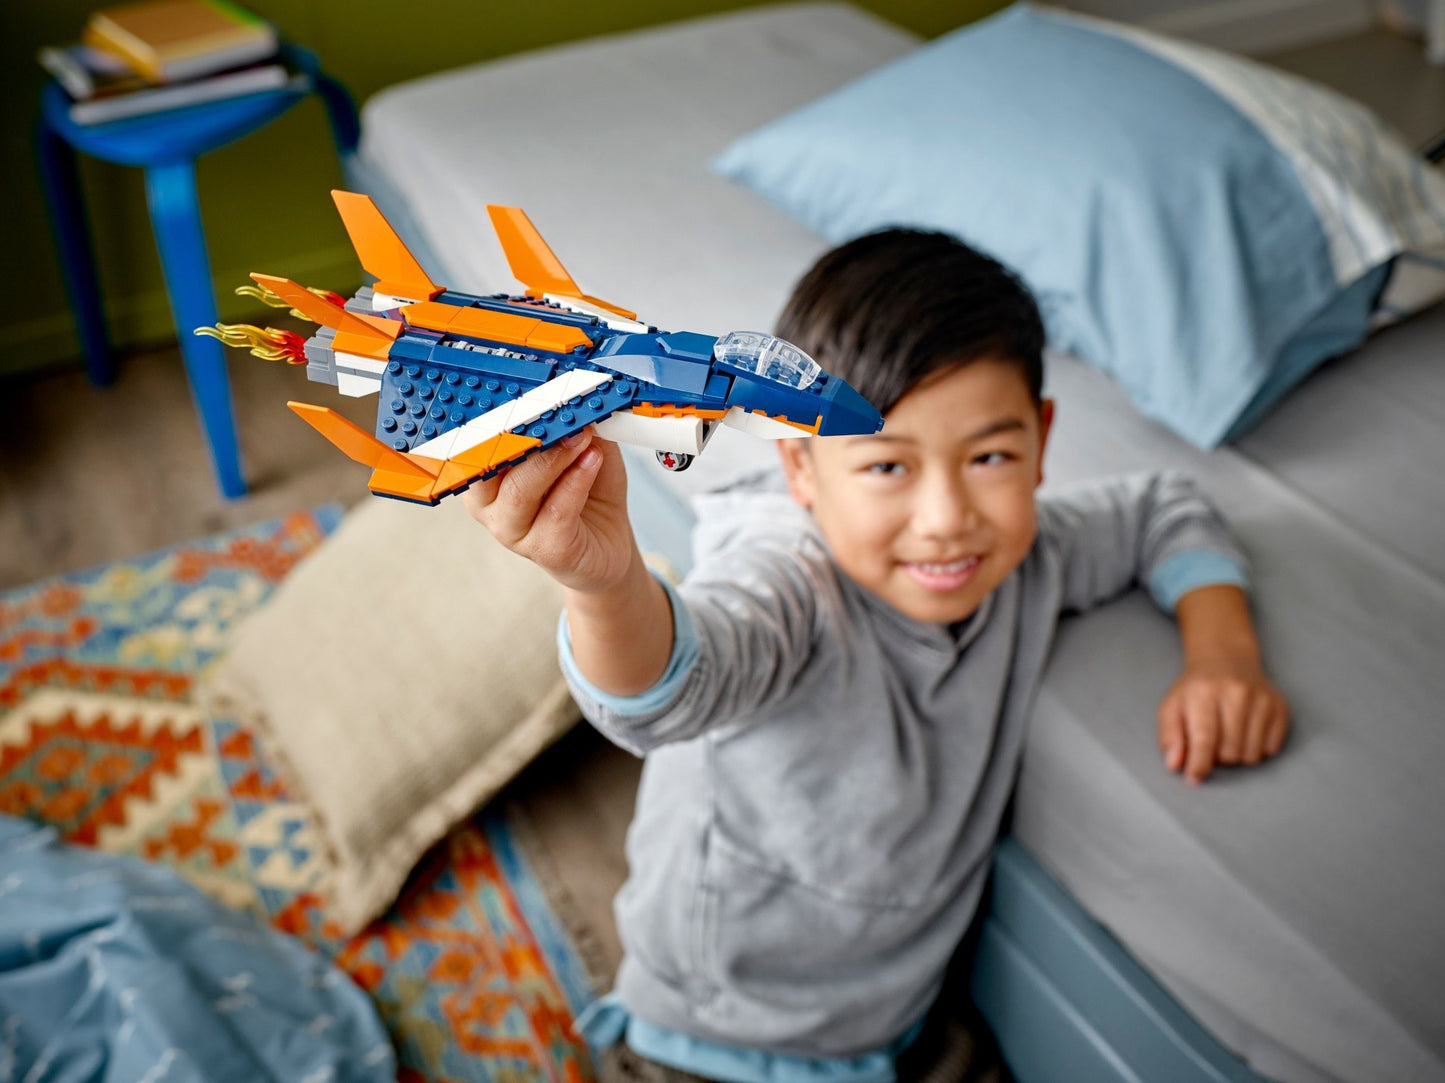 LEGO® Creator 3 in 1 - Avion supersonic 31126, 215 piese